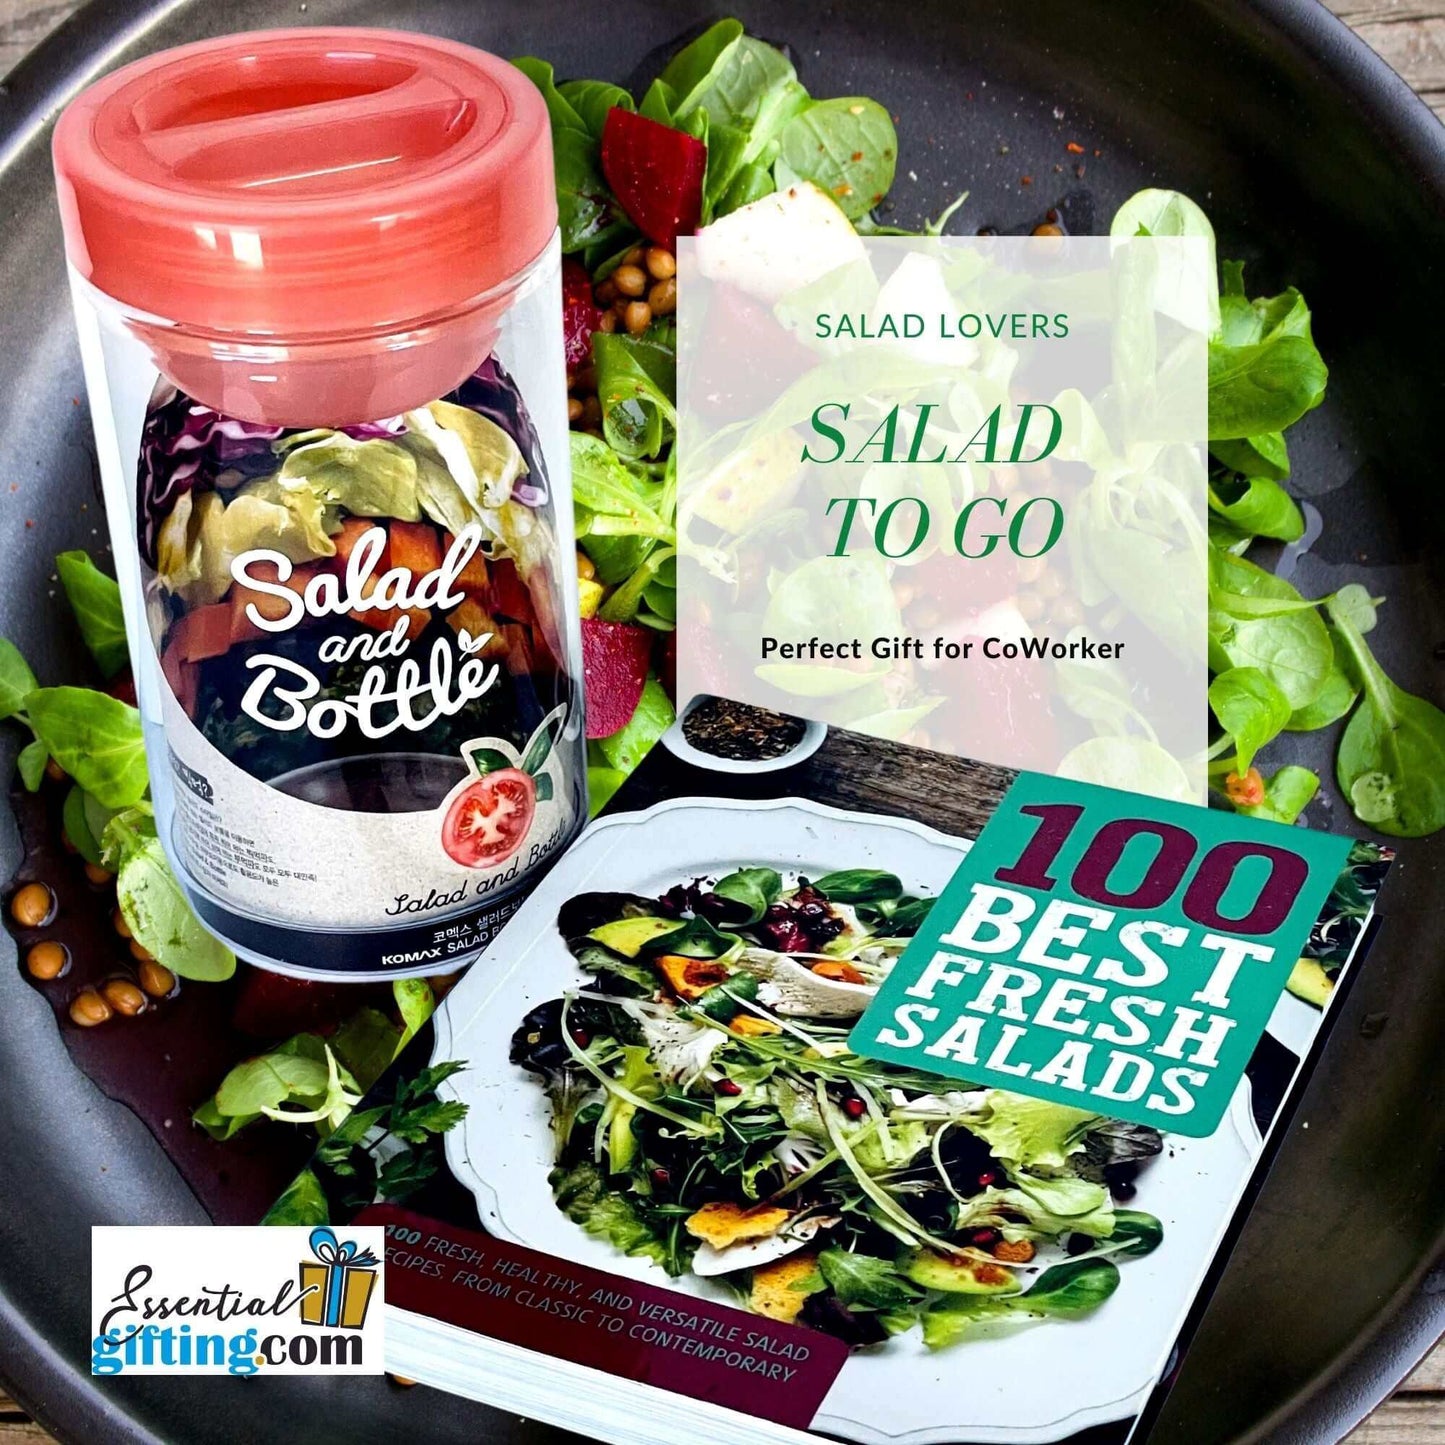 Salad lover's gift set: Reusable salad container, salad-themed accessories, and a book of 100 healthy salad recipes - the perfect gift for the salad enthusiast.